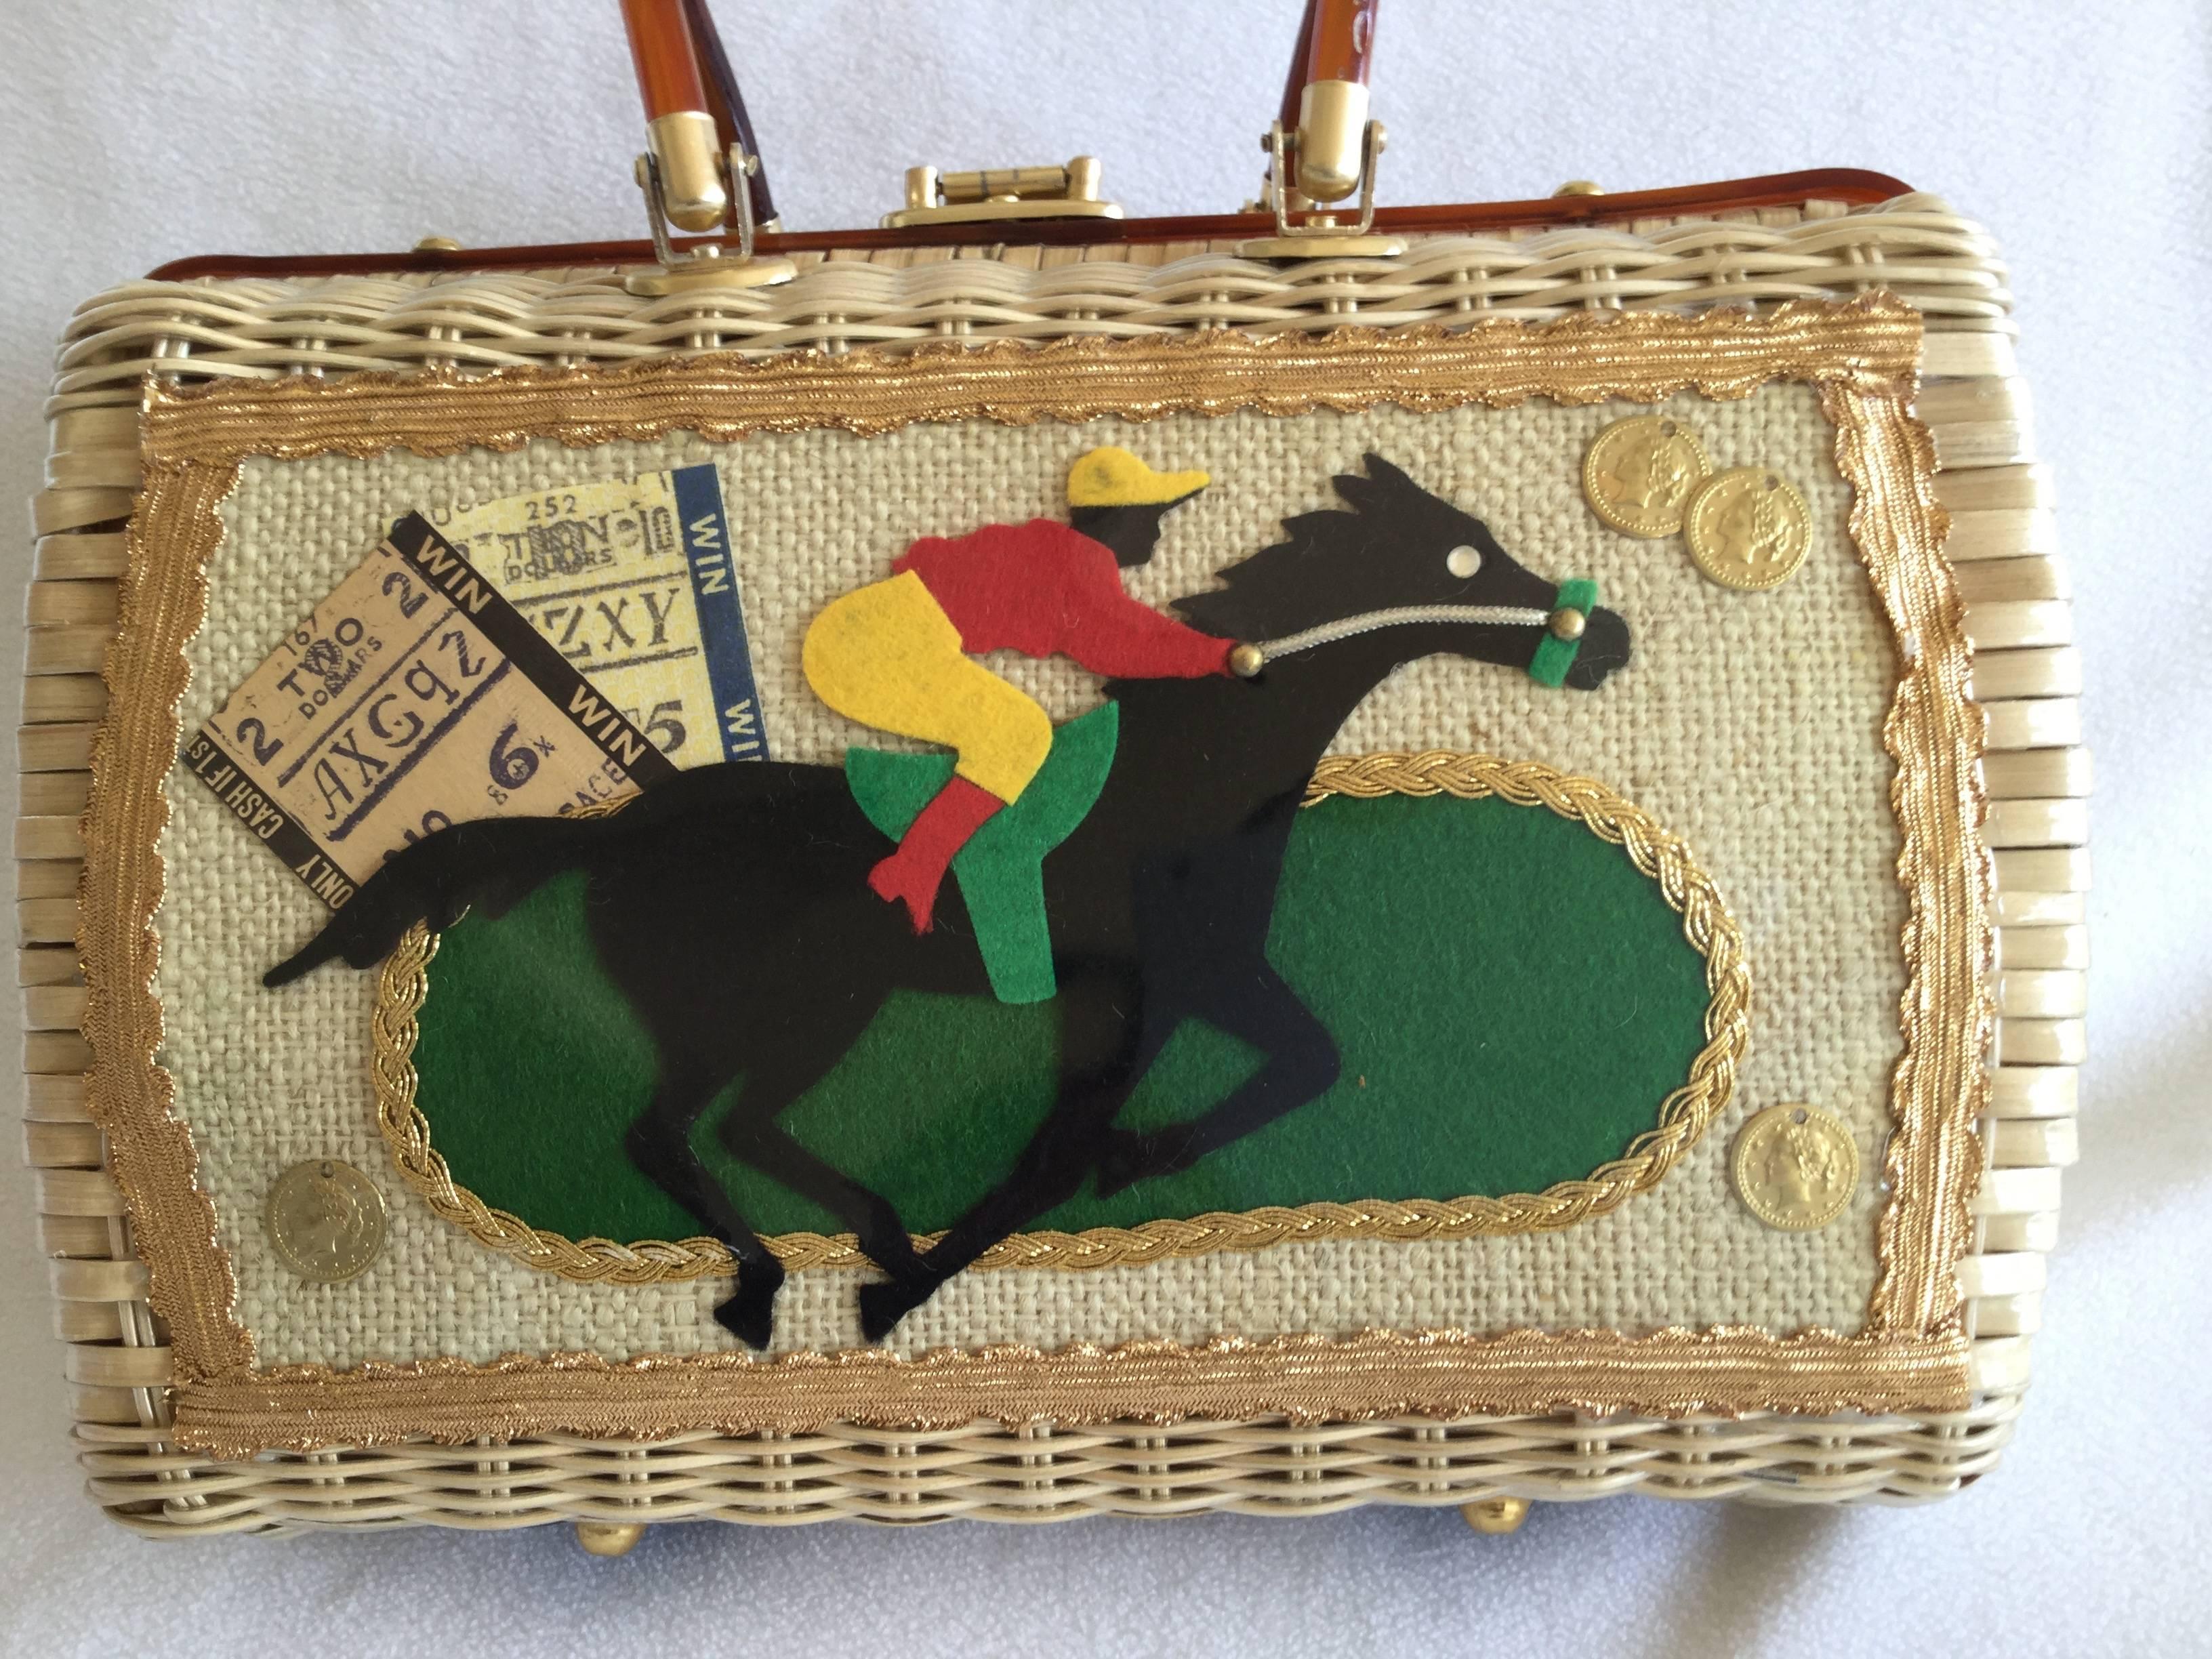 Rare vintage racing themed wicker handbag. The jockey is made from collage of brightly colored felt pieces. Golden coins and racing tickets complete the scene all of which is encased under clear vinyl. This tableau is then framed by gold metallic